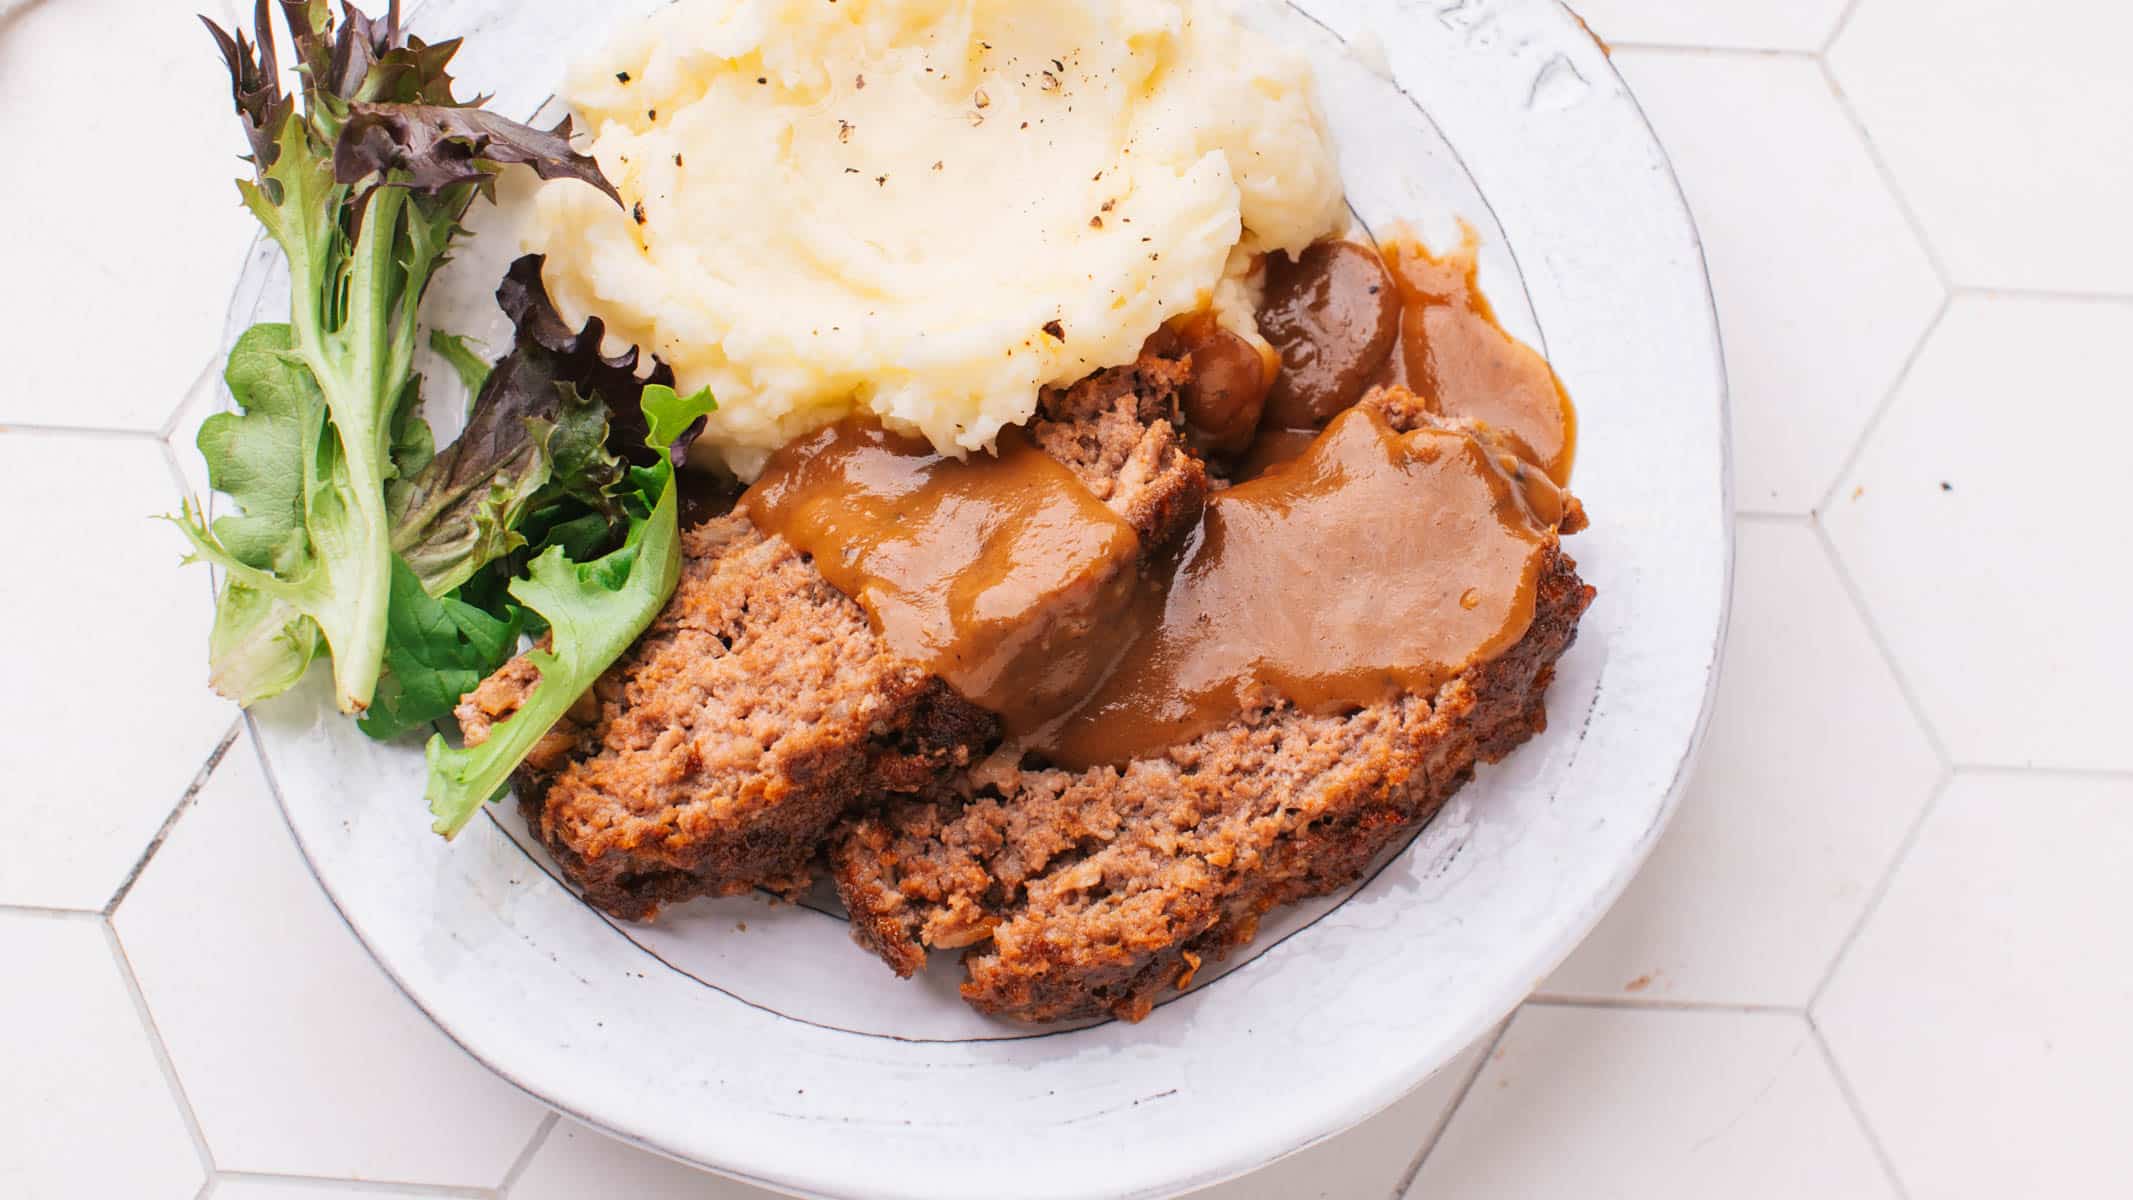 Lipton Meatloaf Recipe and gravy on a plate with side dishes.